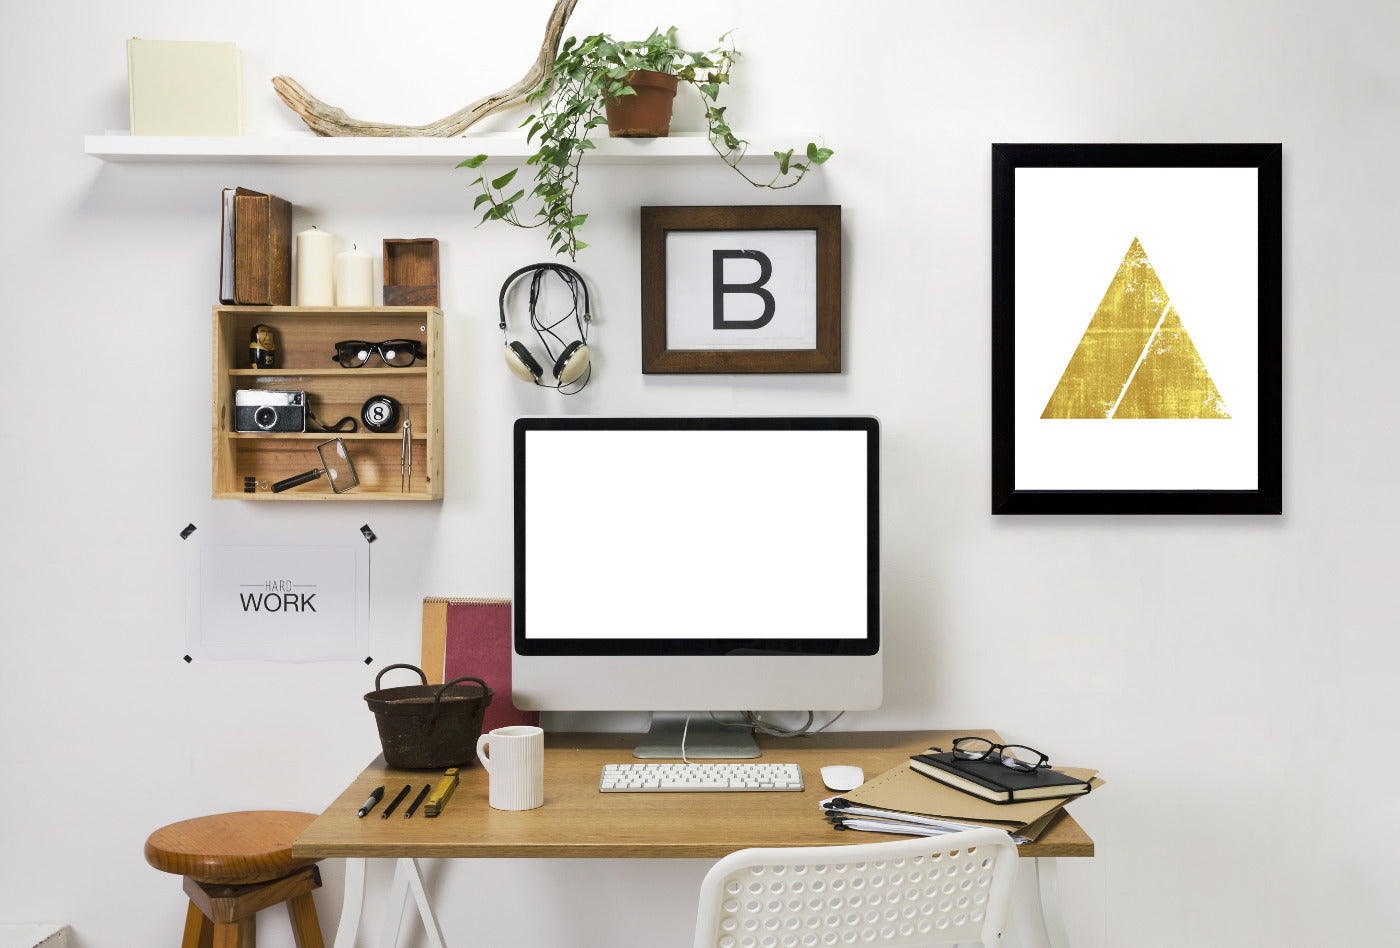 Triangle1 by Ikonolexi Framed Print - Americanflat